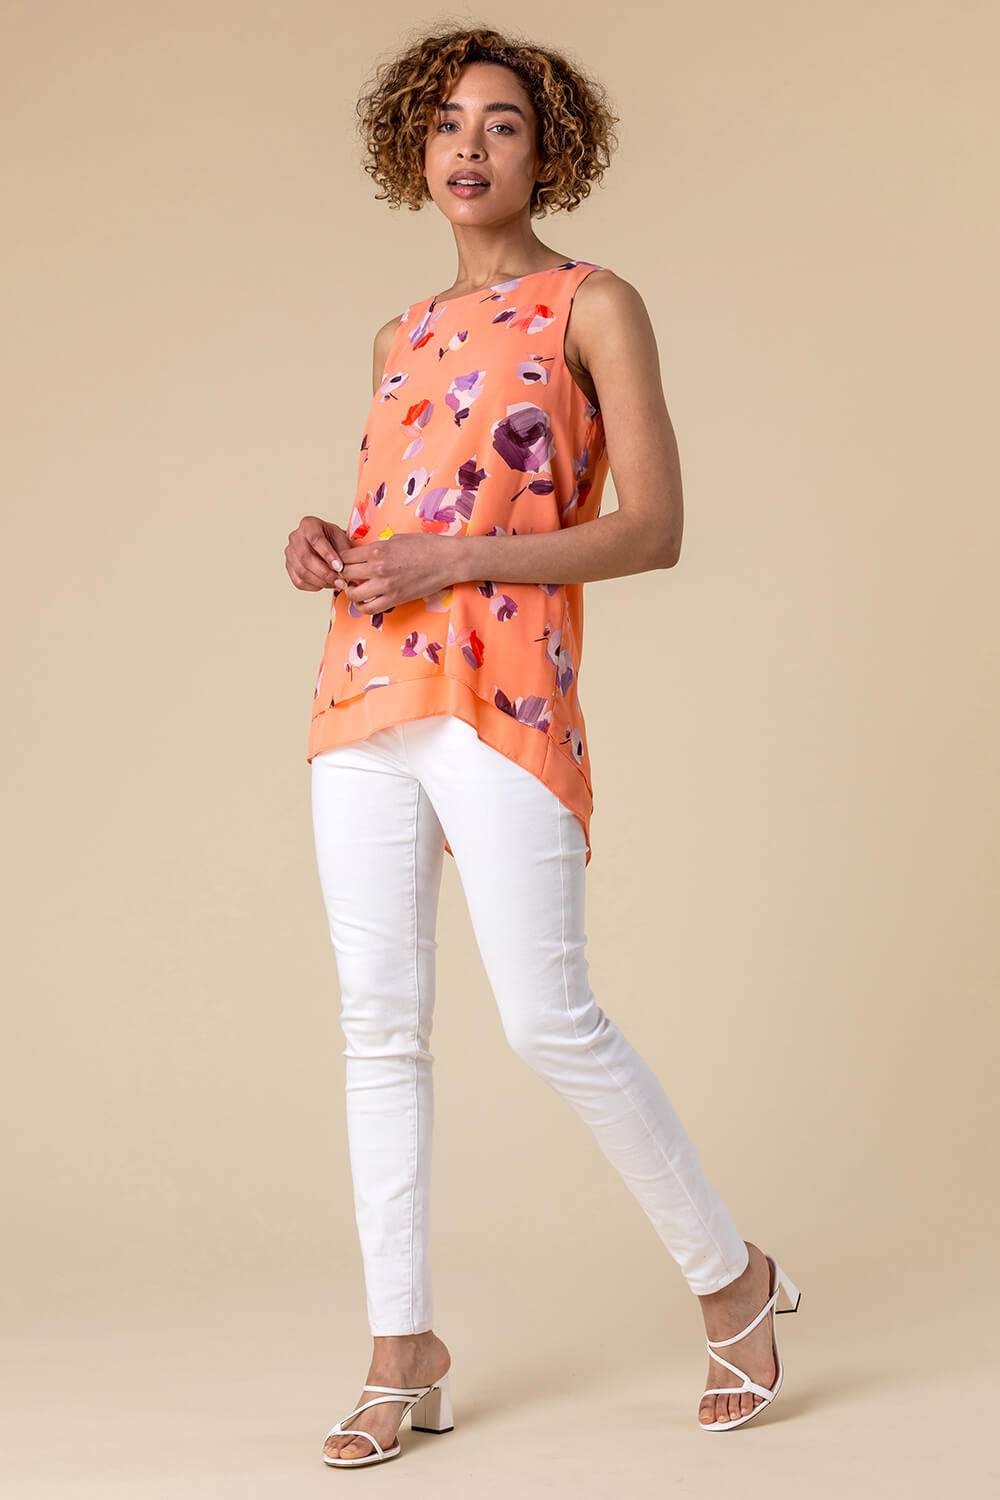 CORAL Abstract Floral Print Vest Top, Image 3 of 4